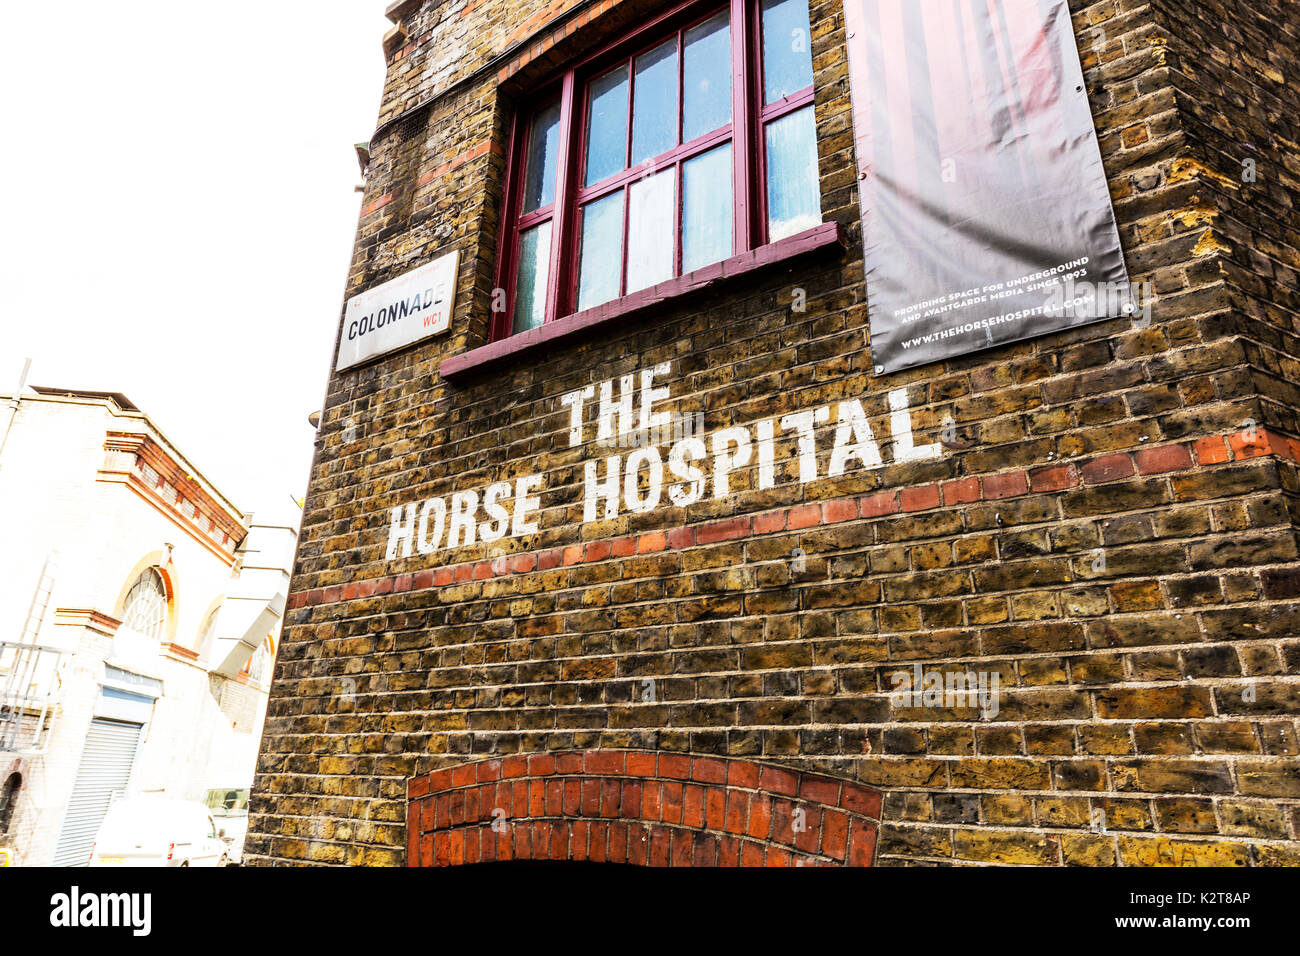 The Horse Hospital London, Once home to sick and injured horses, The Horse Hospital is now an avant garde arts venue located in Bloomsbury, London Stock Photo